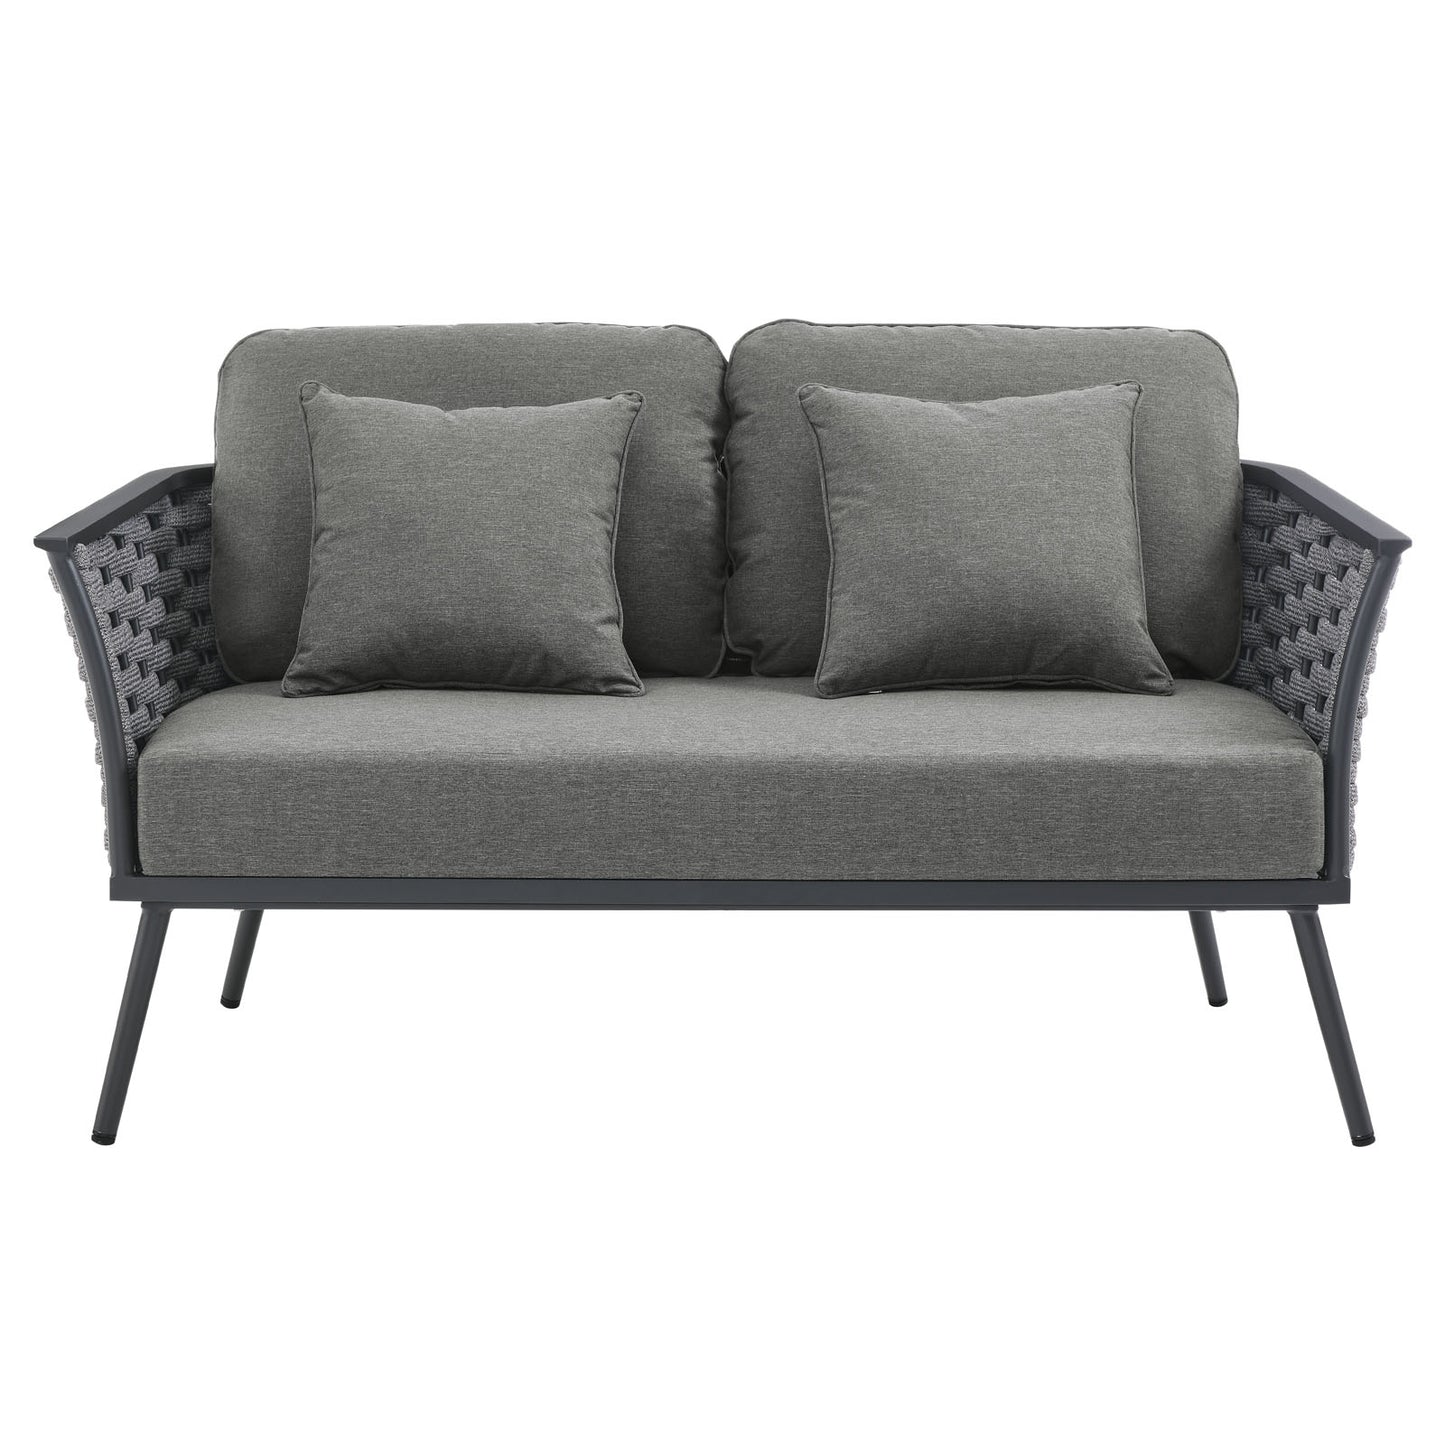 Stance Outdoor Patio Aluminum Loveseat Gray Charcoal EEI-3019-GRY-CHA